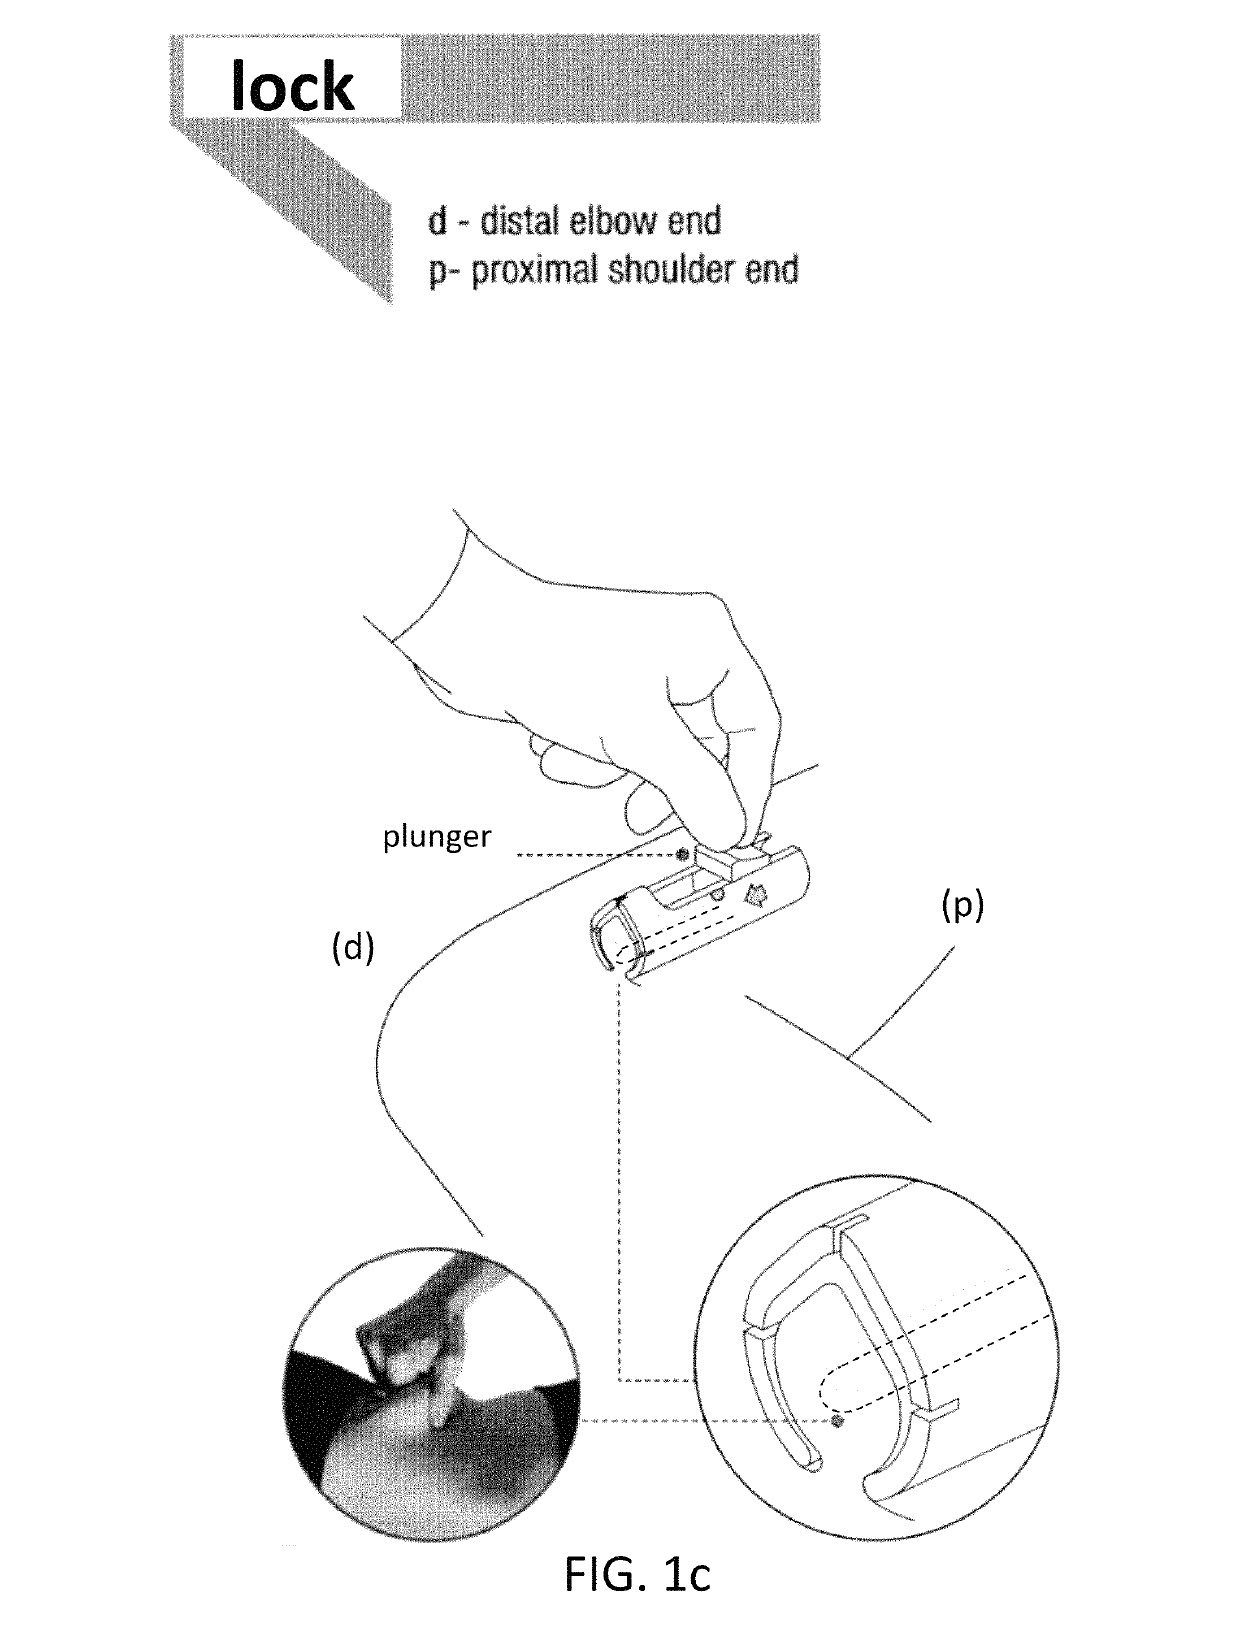 Device for removing an item implanted underneath the skin